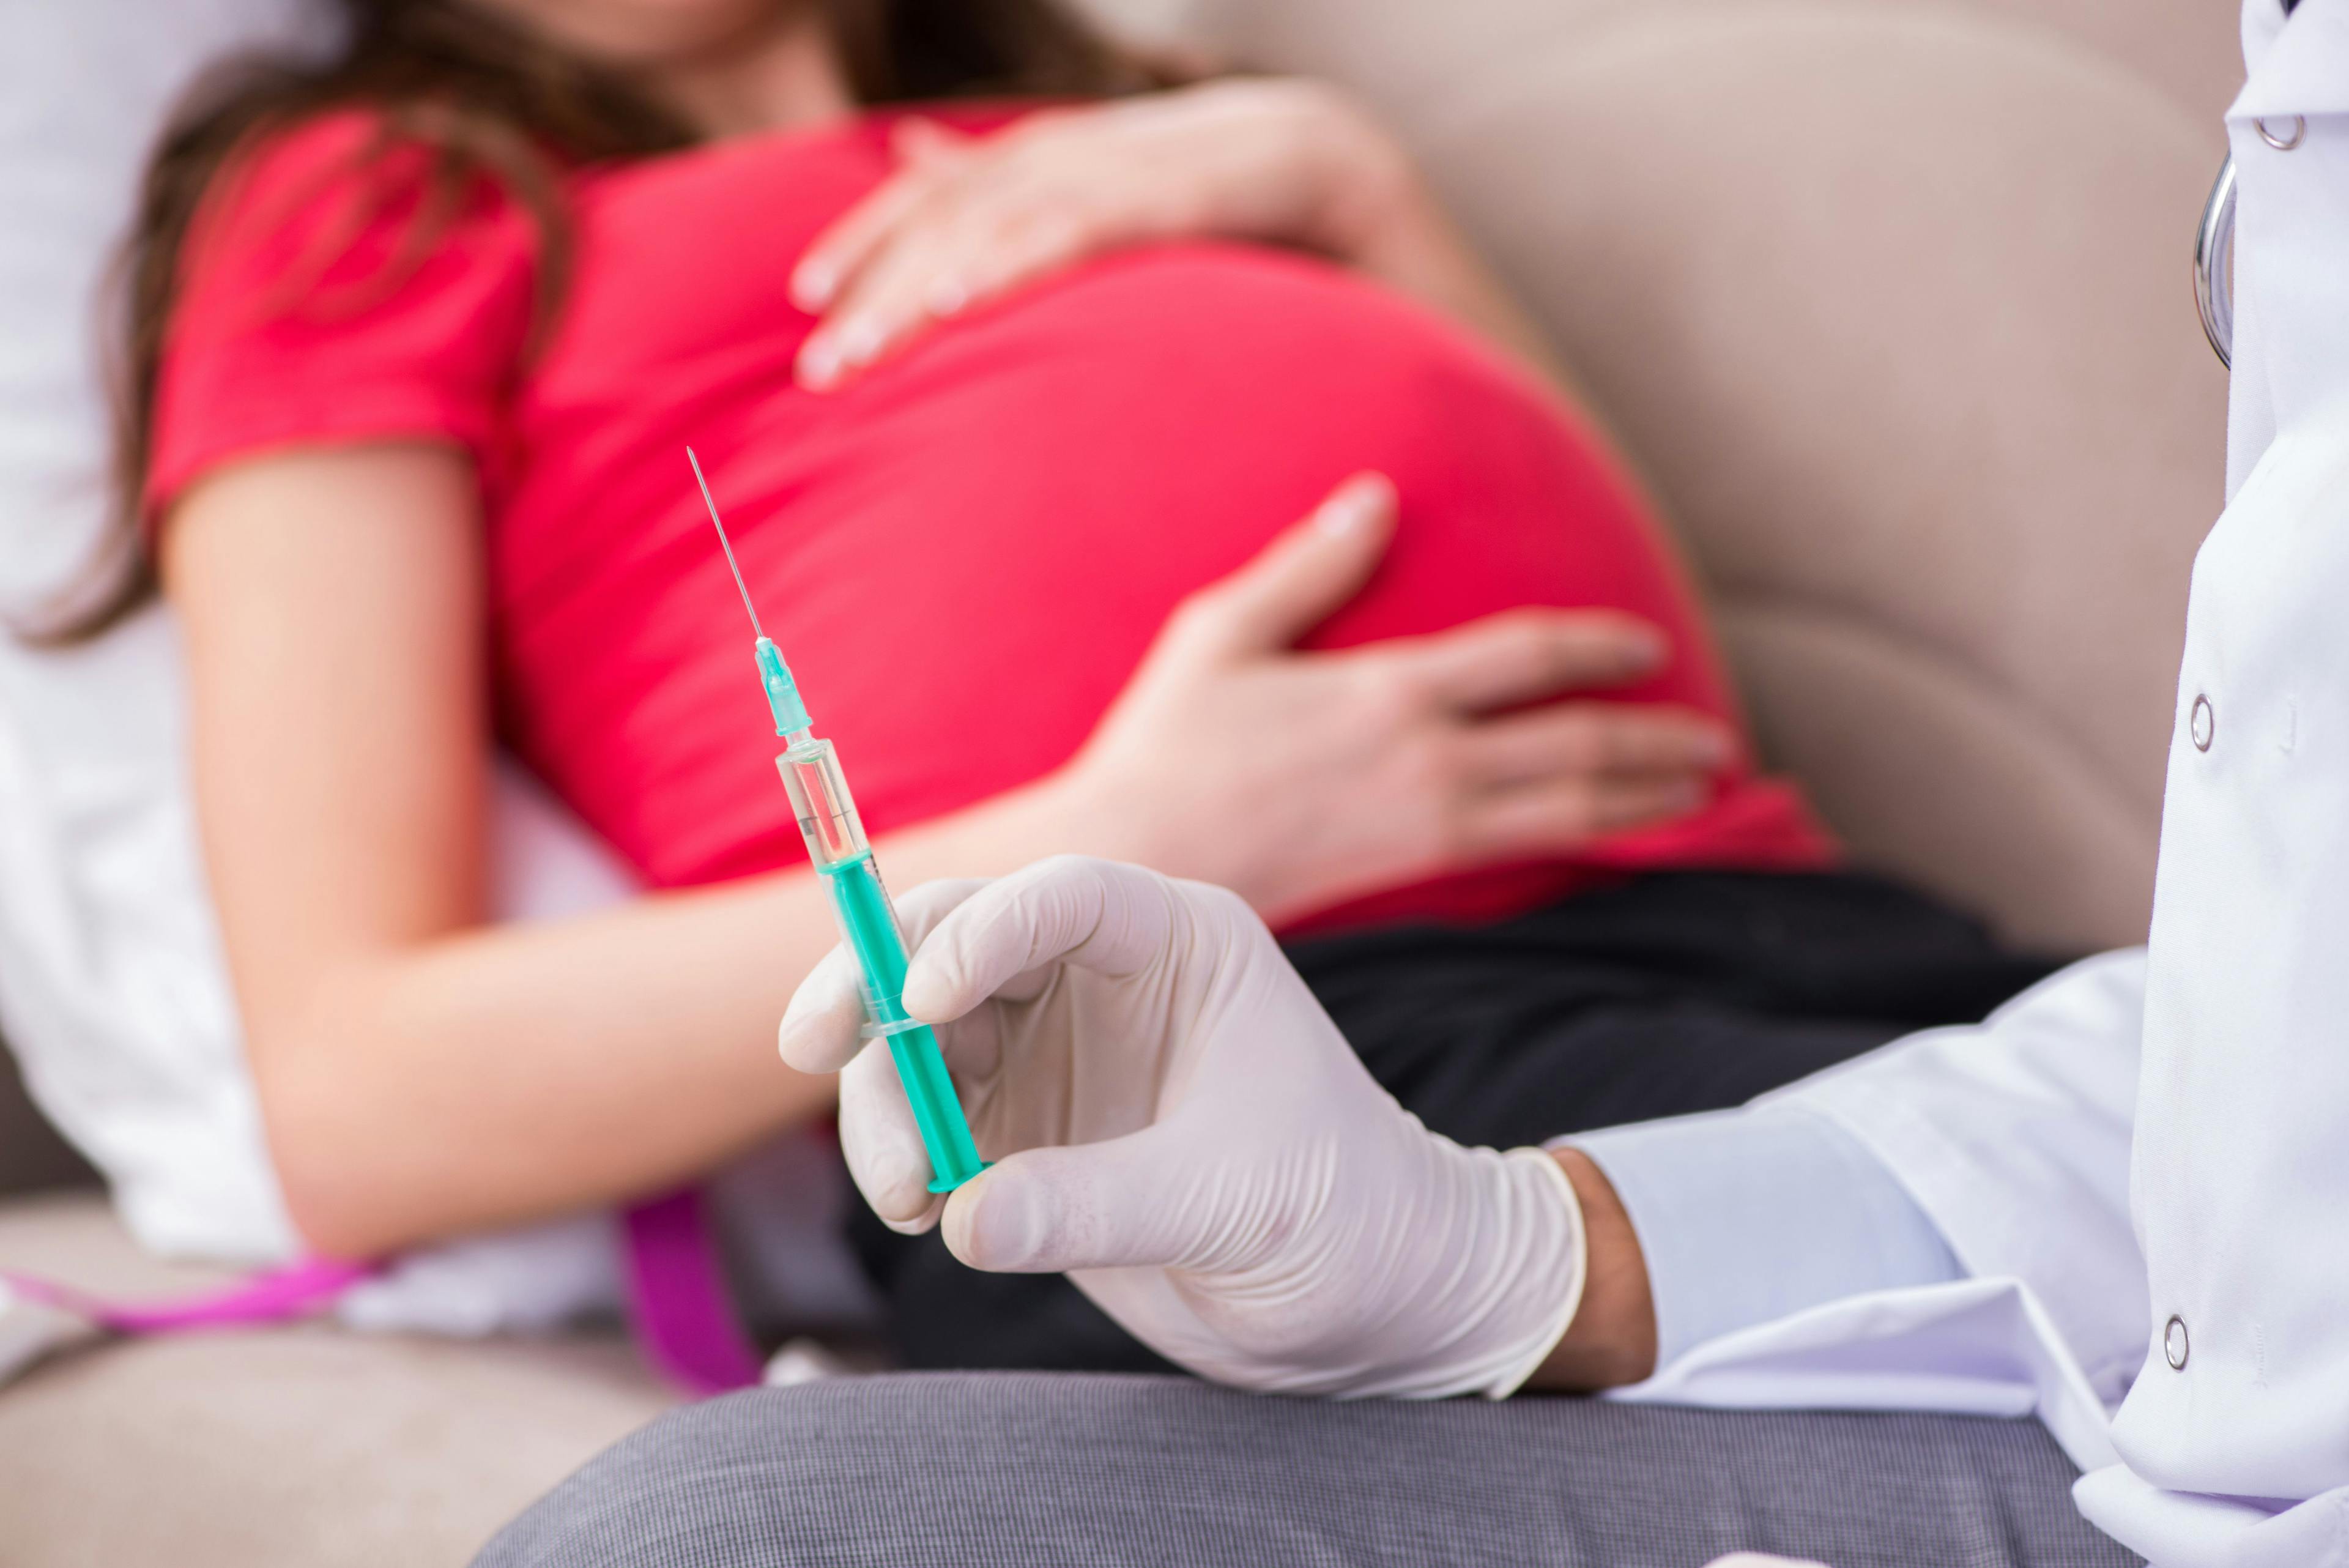 ACOG and SMFM recommend COVID-19 vaccine for pregnant individuals